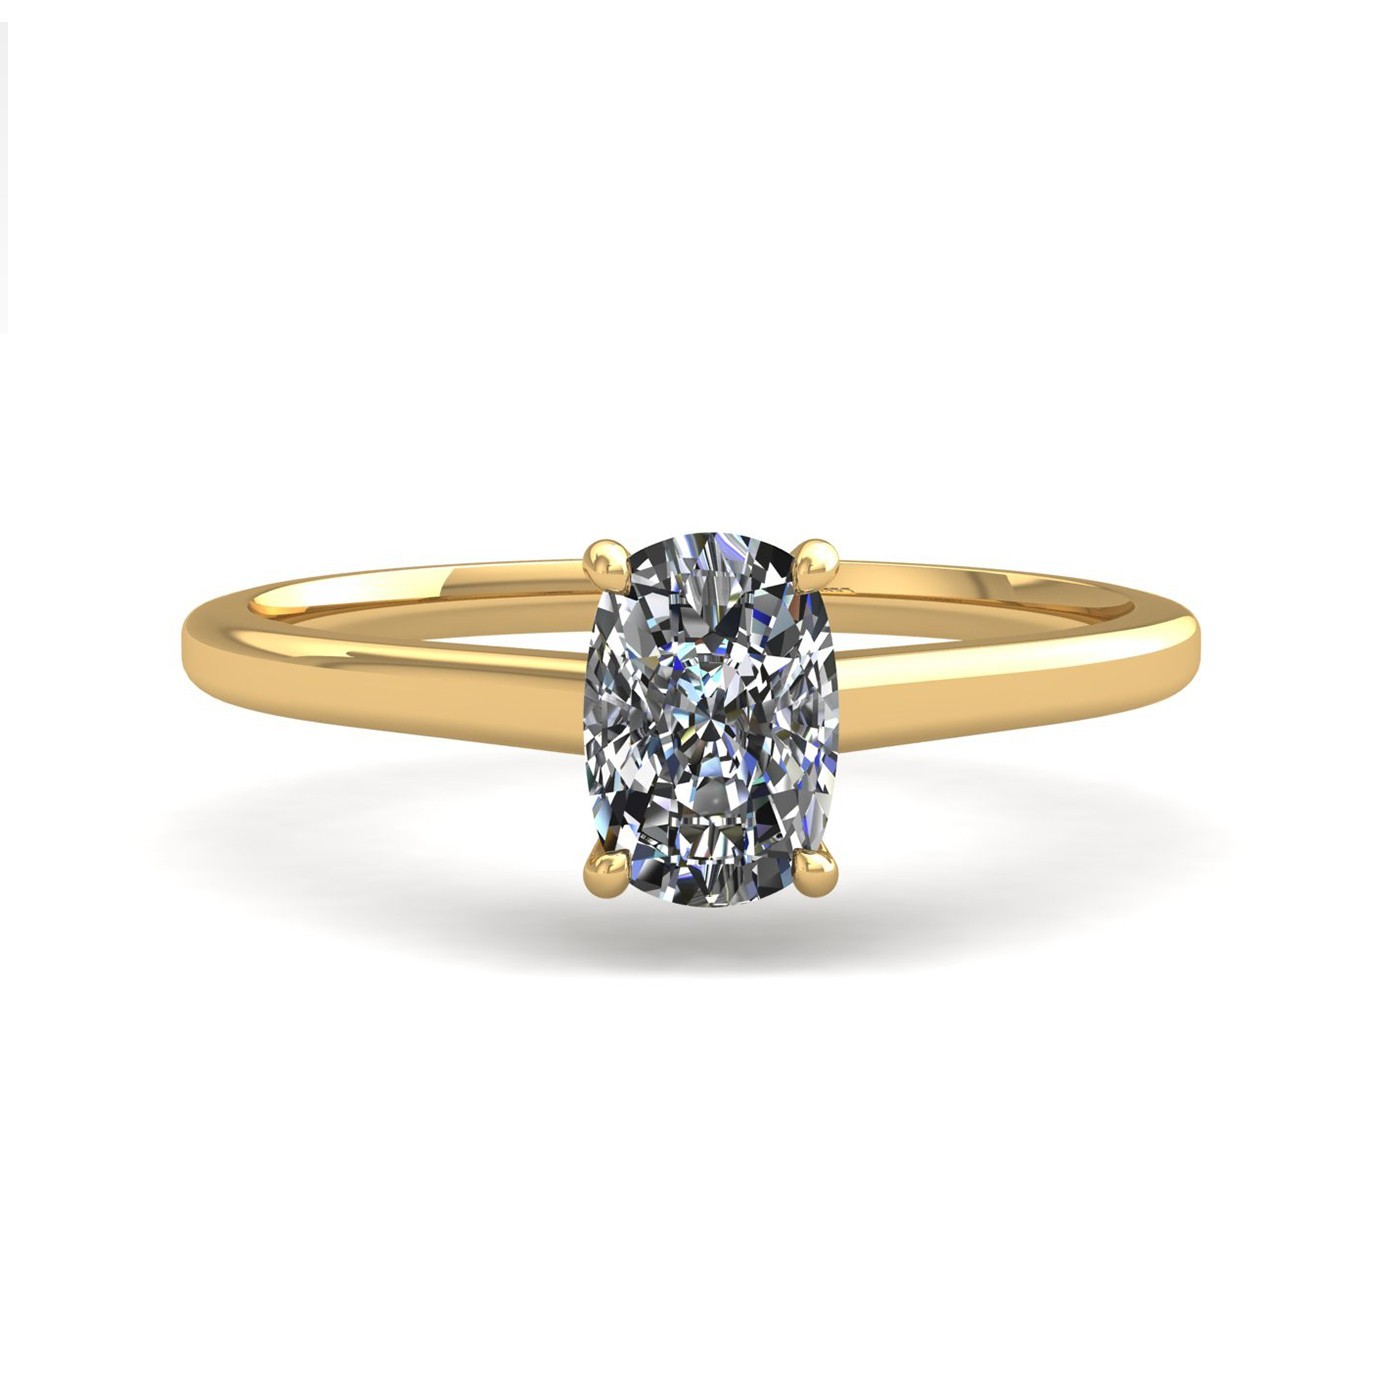 18k yellow gold  0,30 ct 4 prongs solitaire elongated cushion cut diamond engagement ring with whisper thin band Photos & images